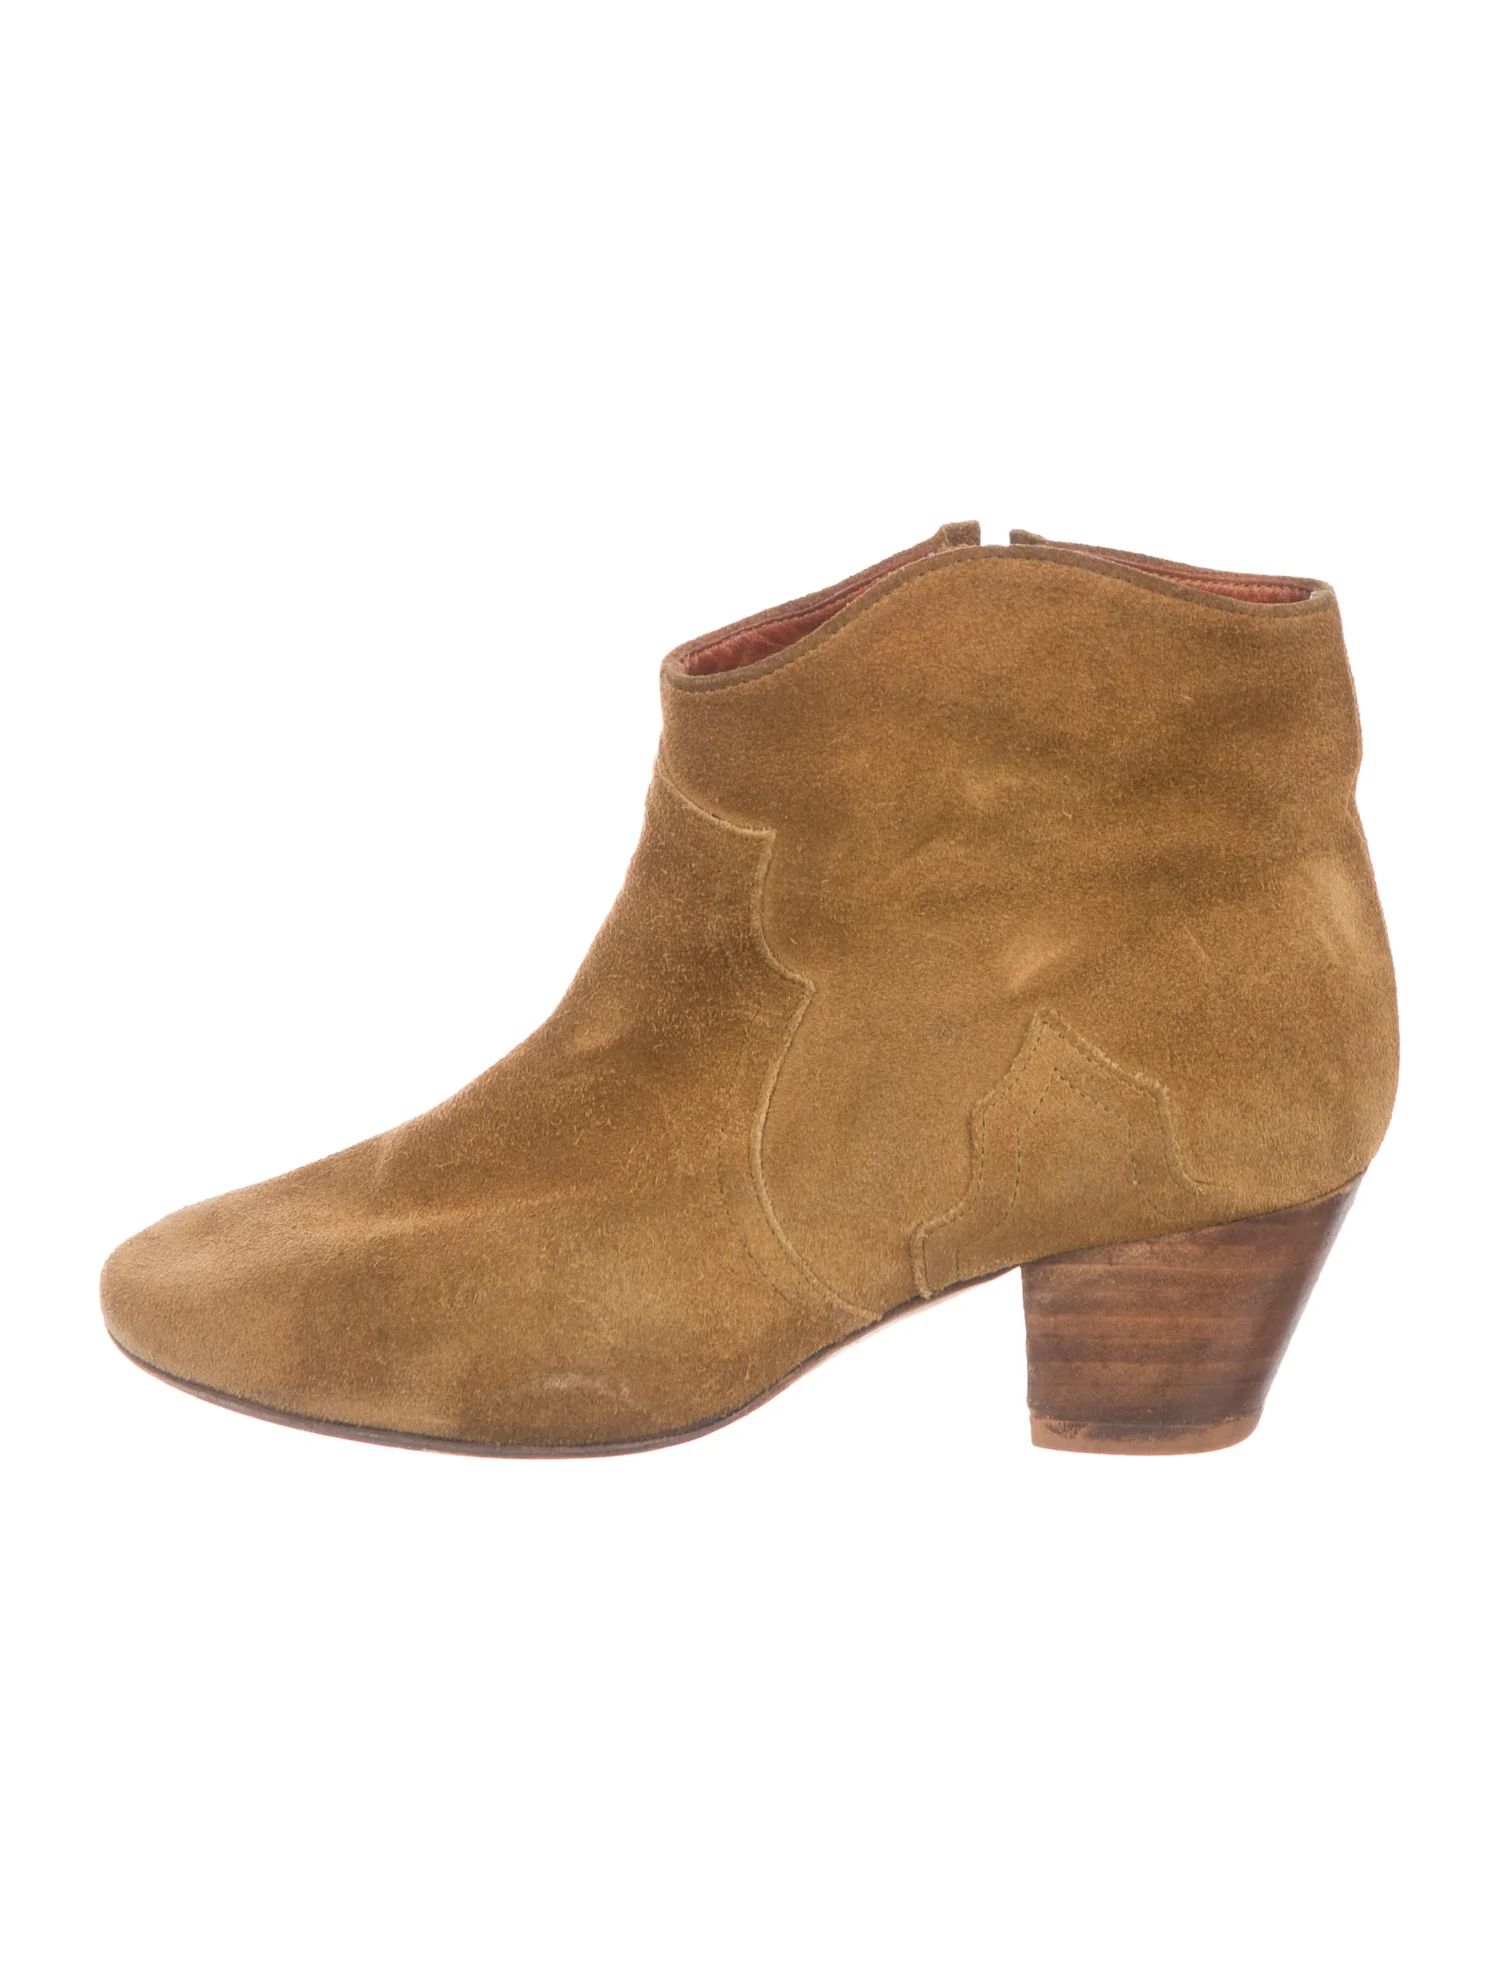 Isabel Marant Dicker Suede Ankle Boots - Shoes -
          ISA60169 | The RealReal | The RealReal